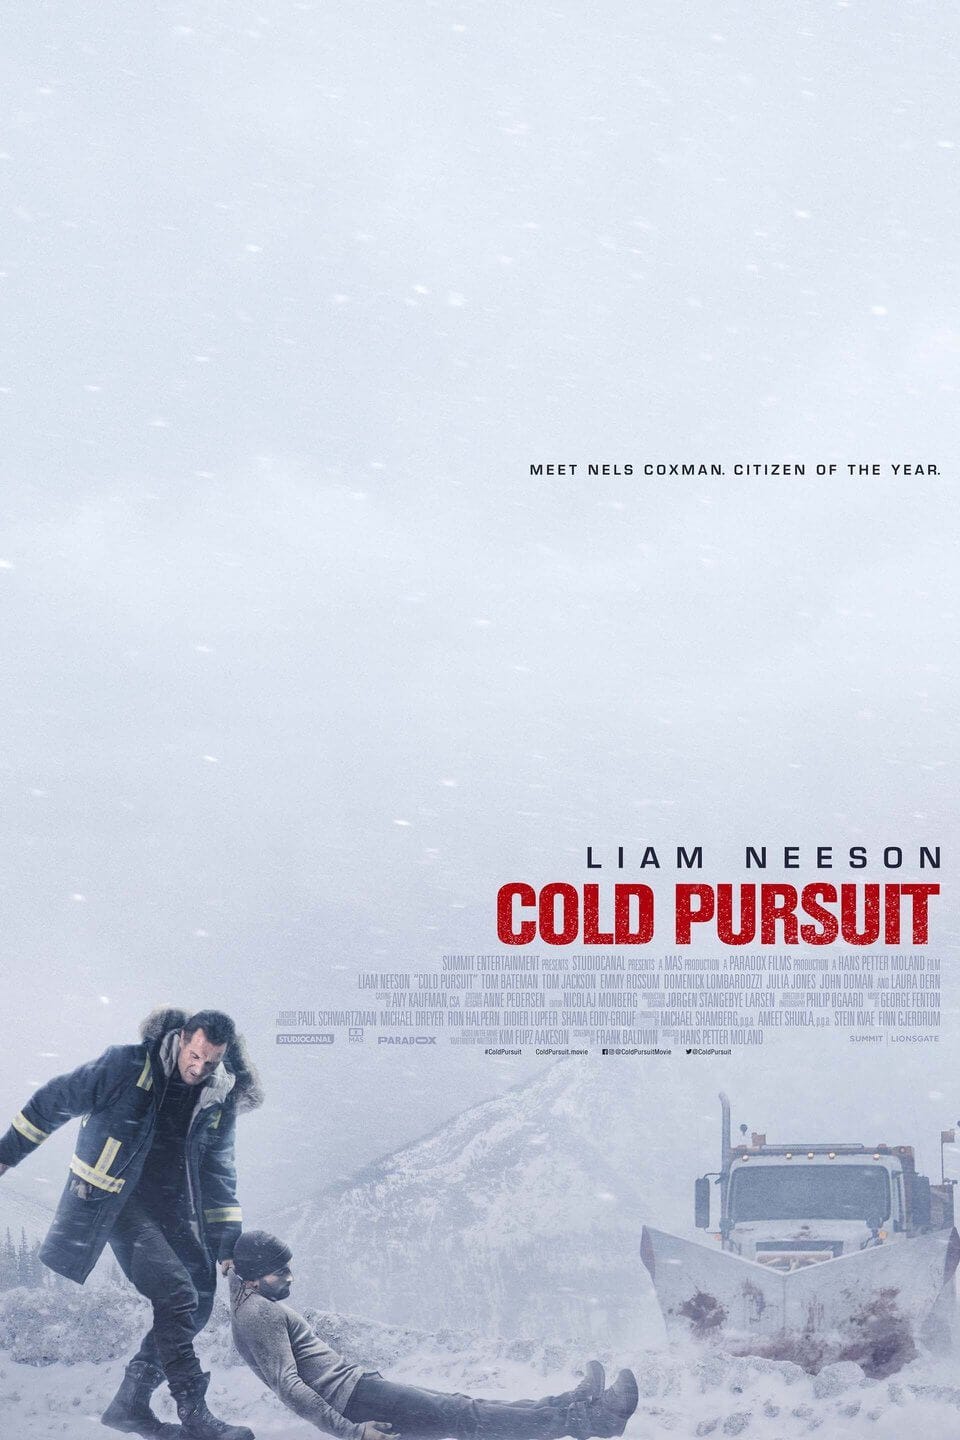 Liam Neeson Is Just Another Grumpy Old Man Trying to Take Down the Vegans  In 'Cold Pursuit' | by Jill Ettinger | Medium